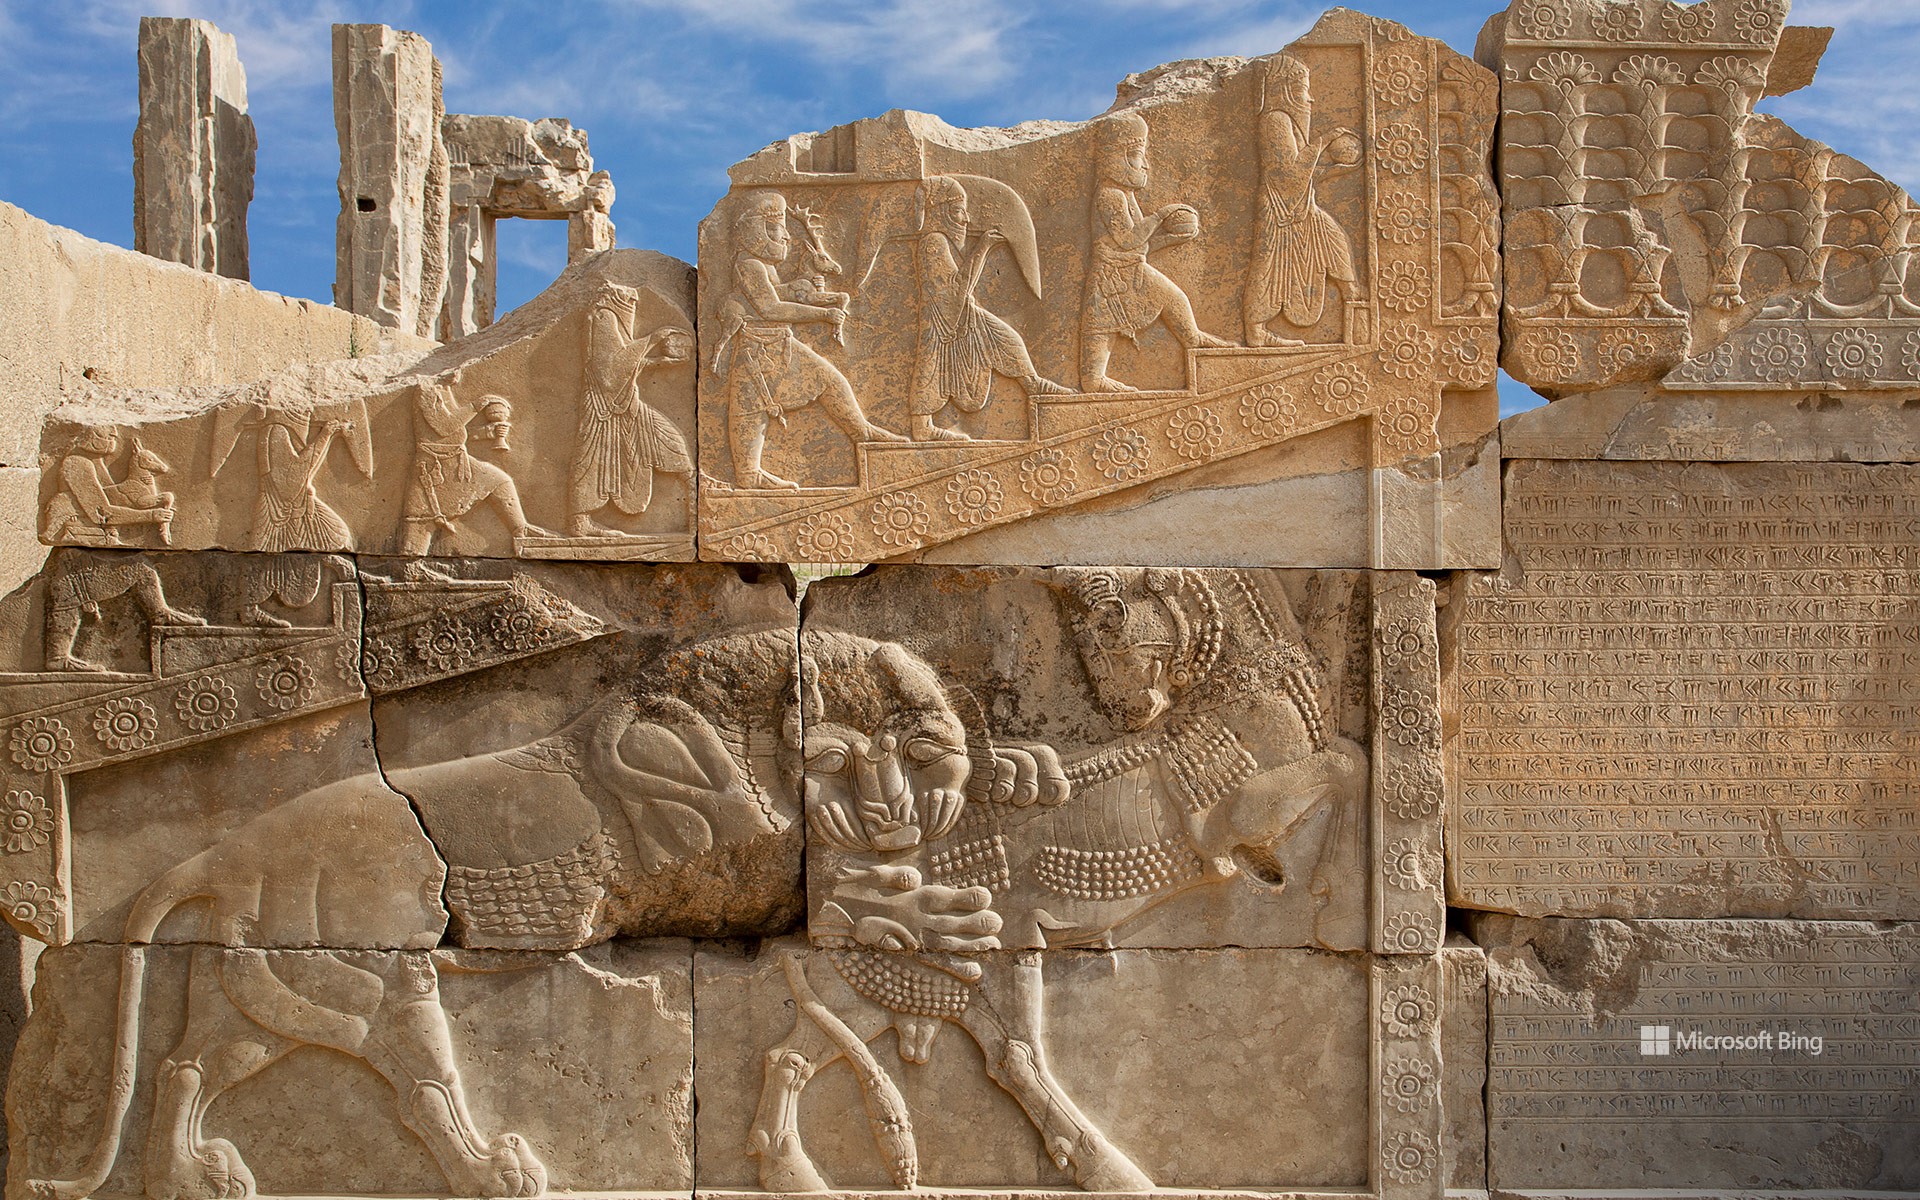 Reliefs in the ancient Persian city of Persepolis, Iran